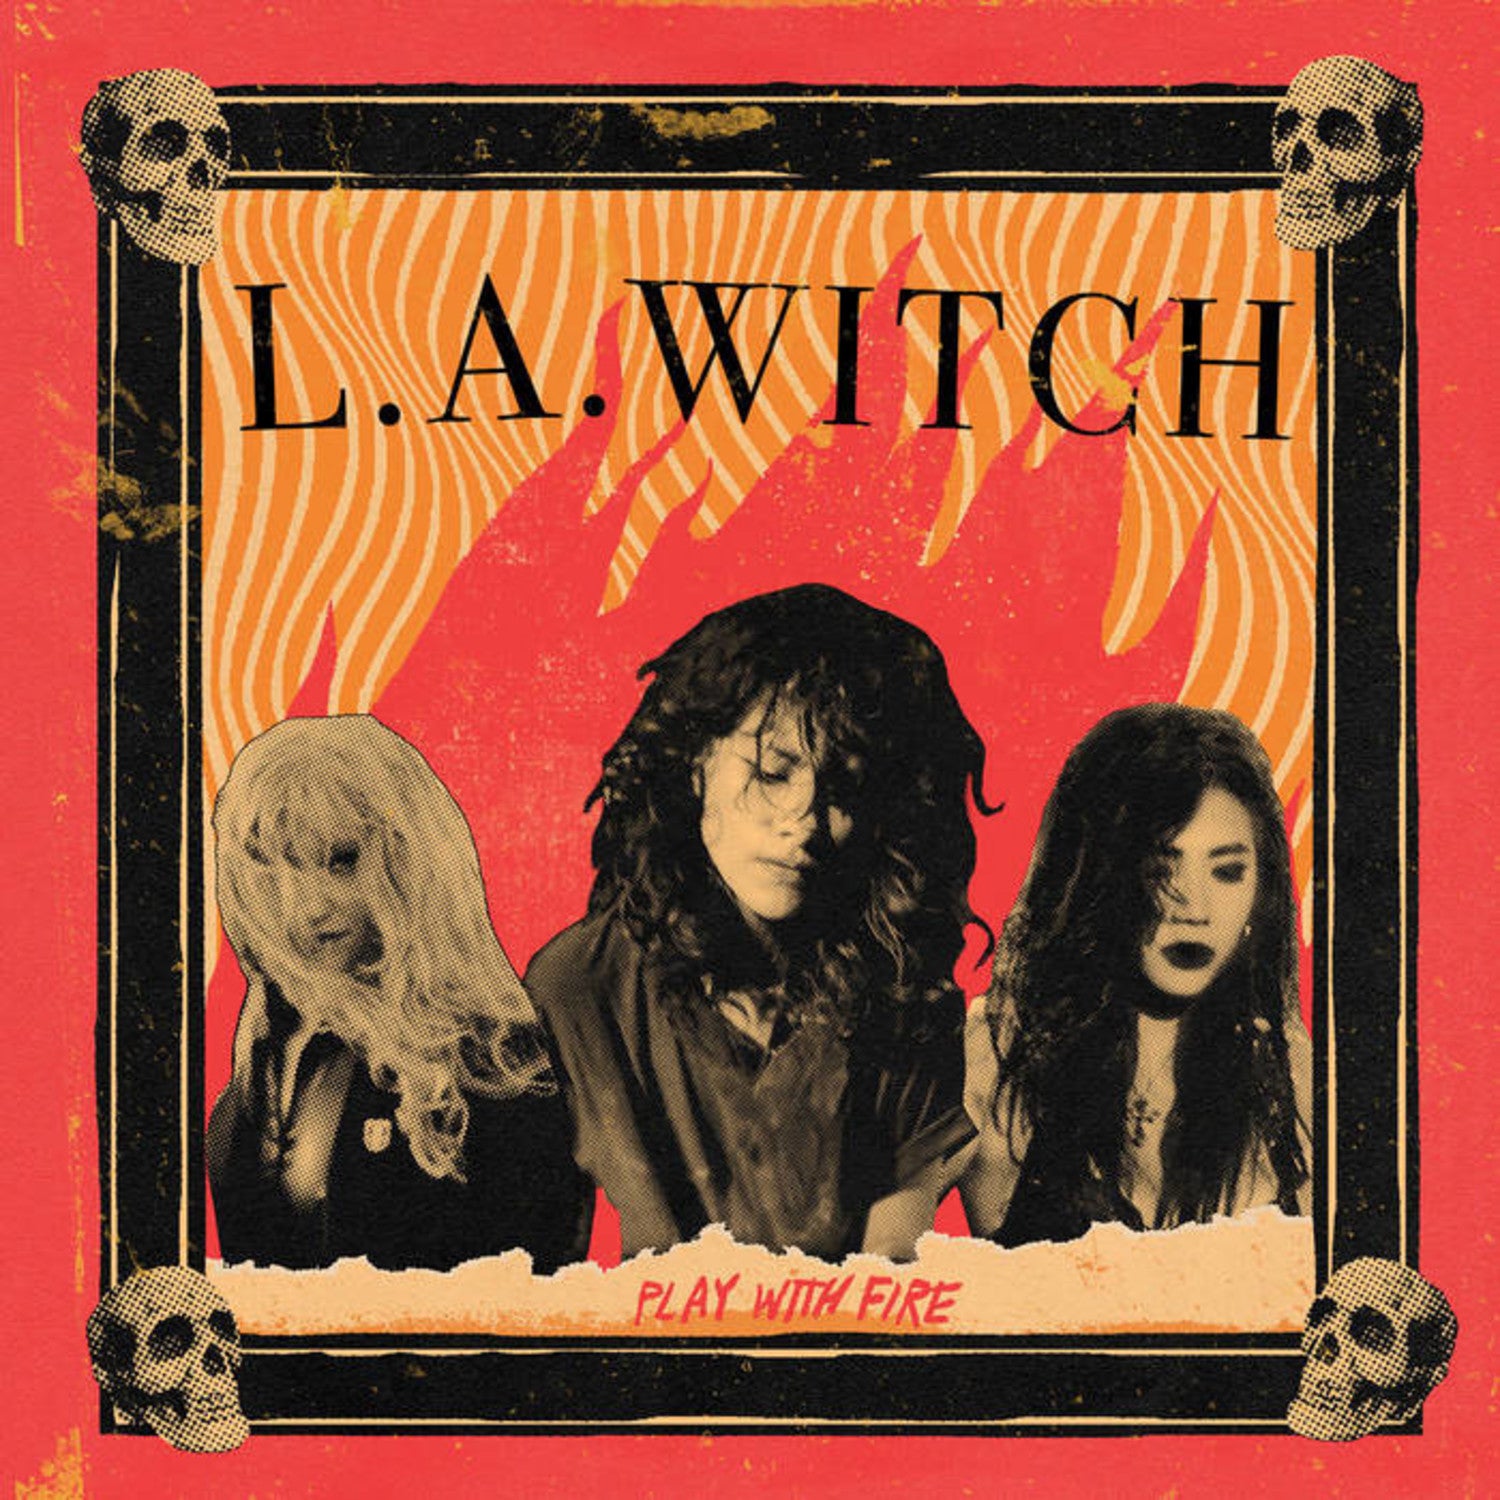 L.A. WITCH - PLAY WITH FIRE Vinyl LP